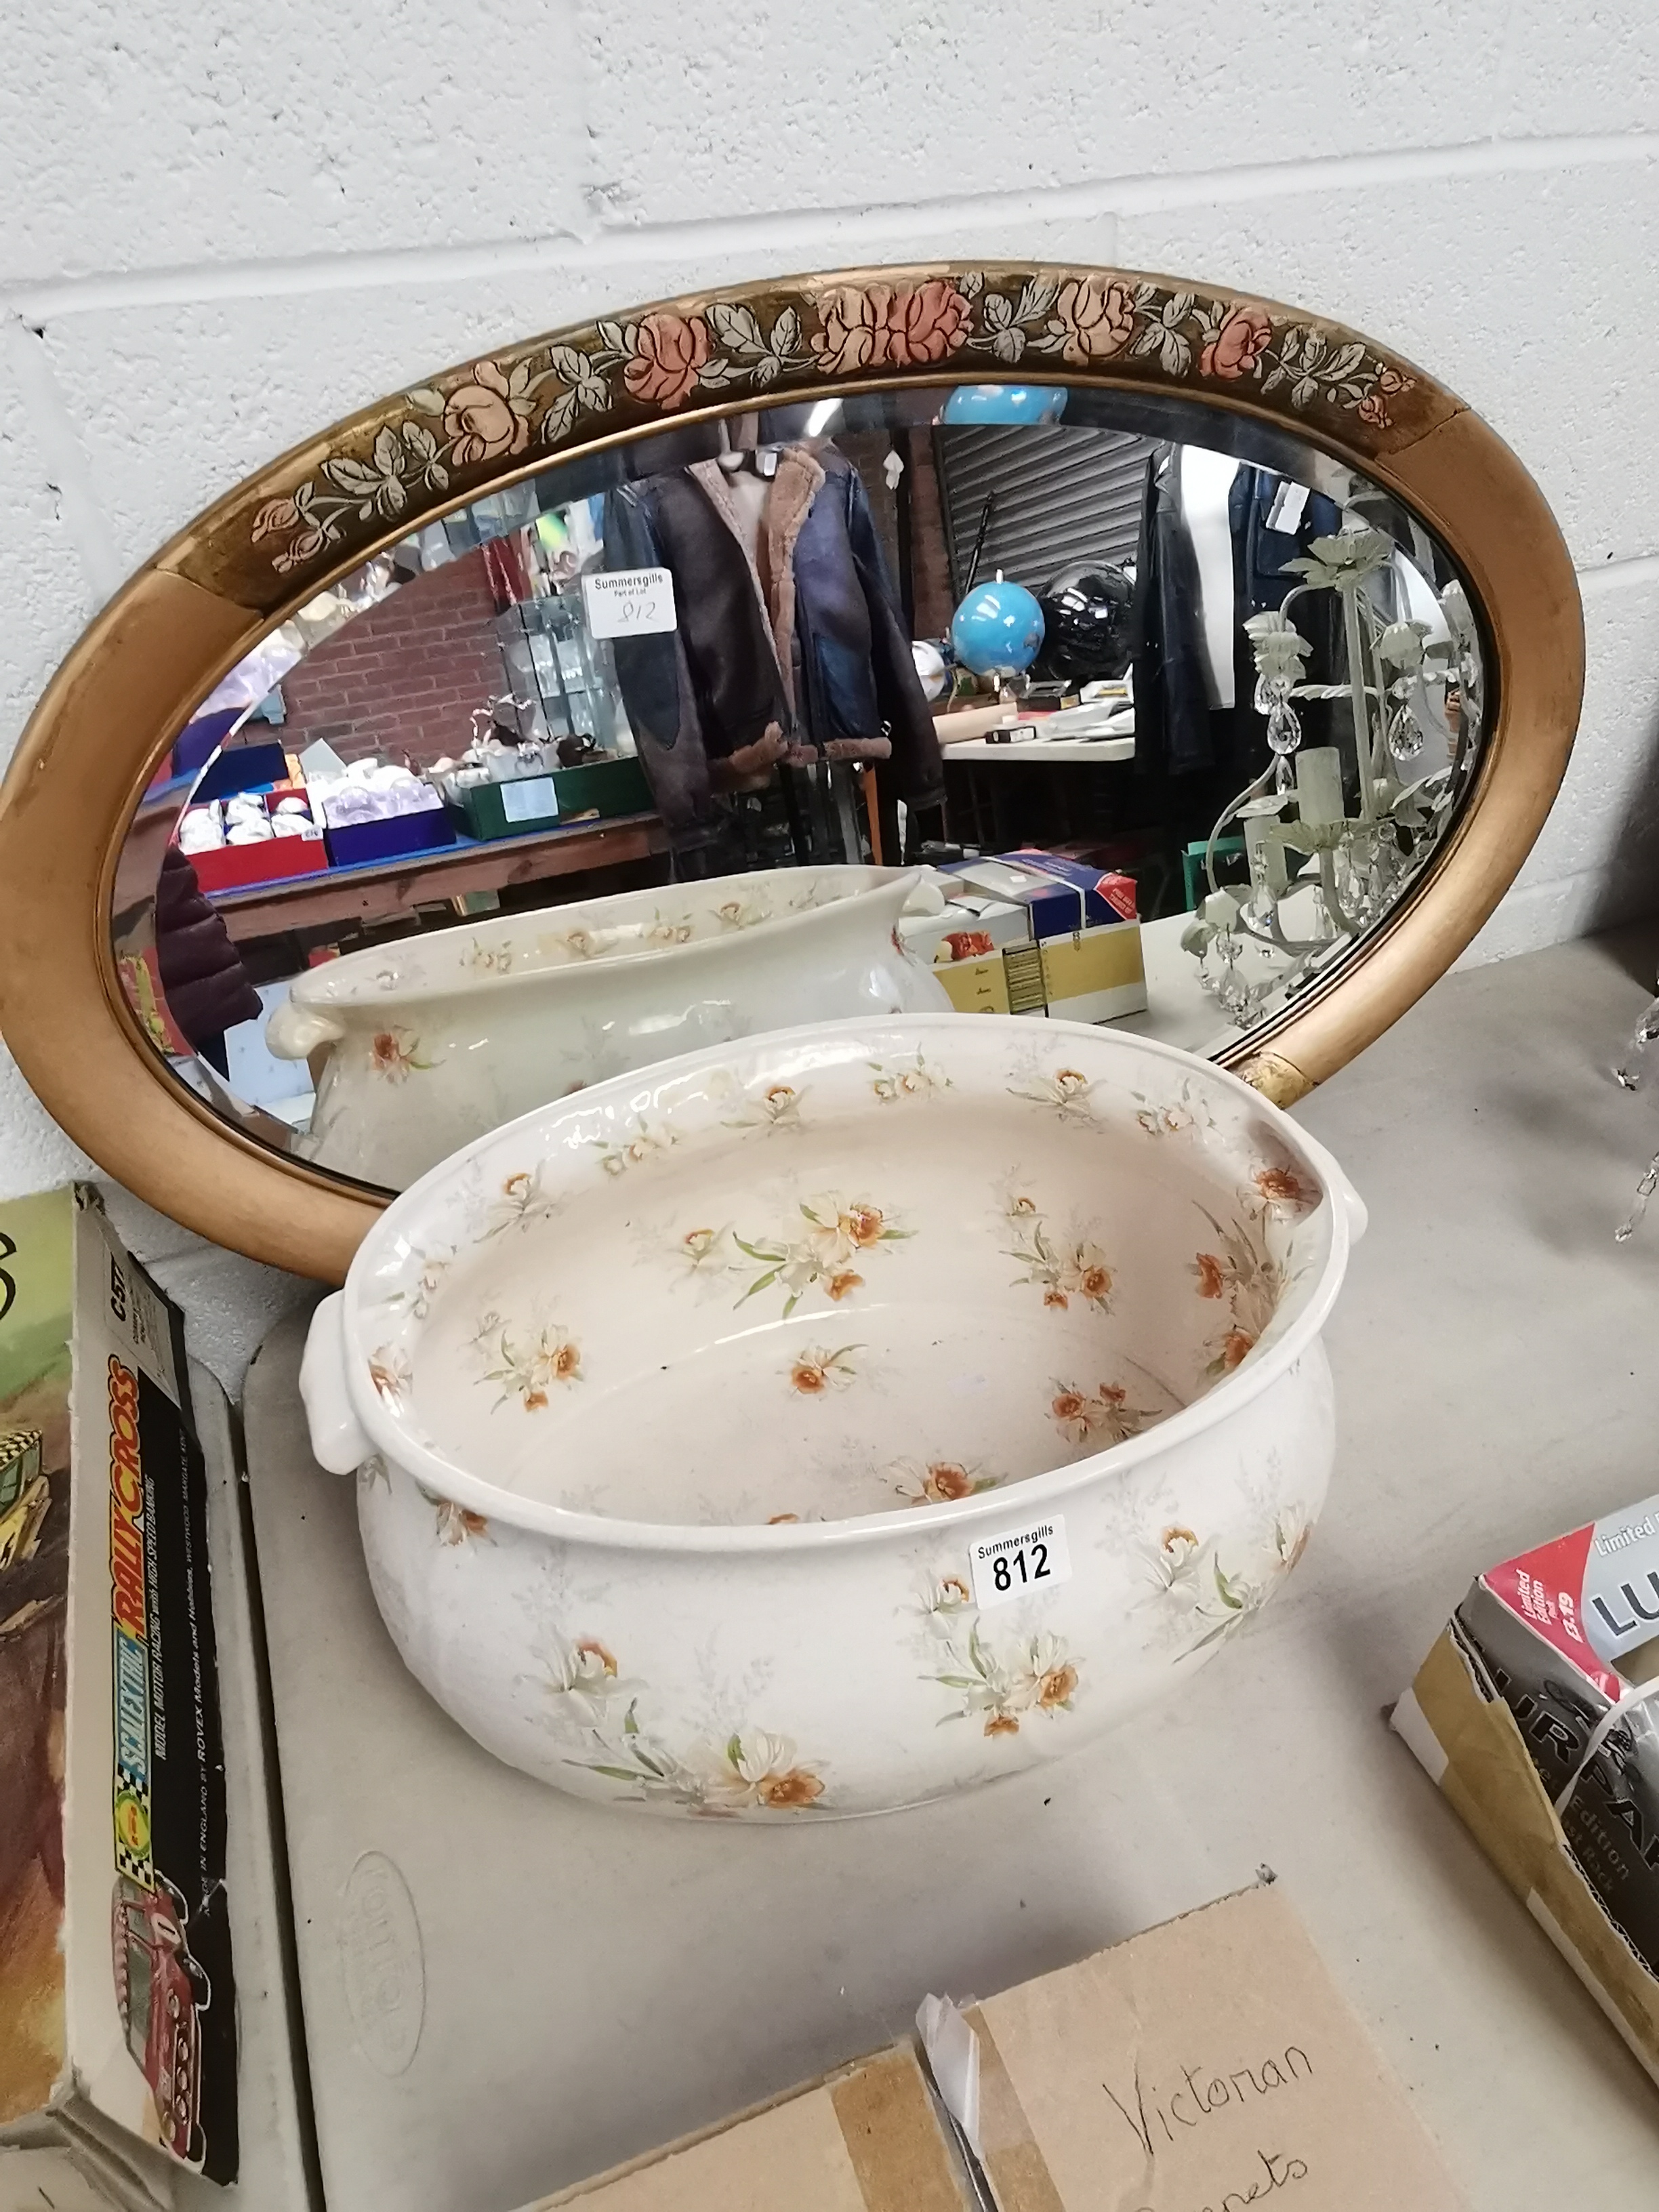 Ornate oval mirror and ironware foot bath